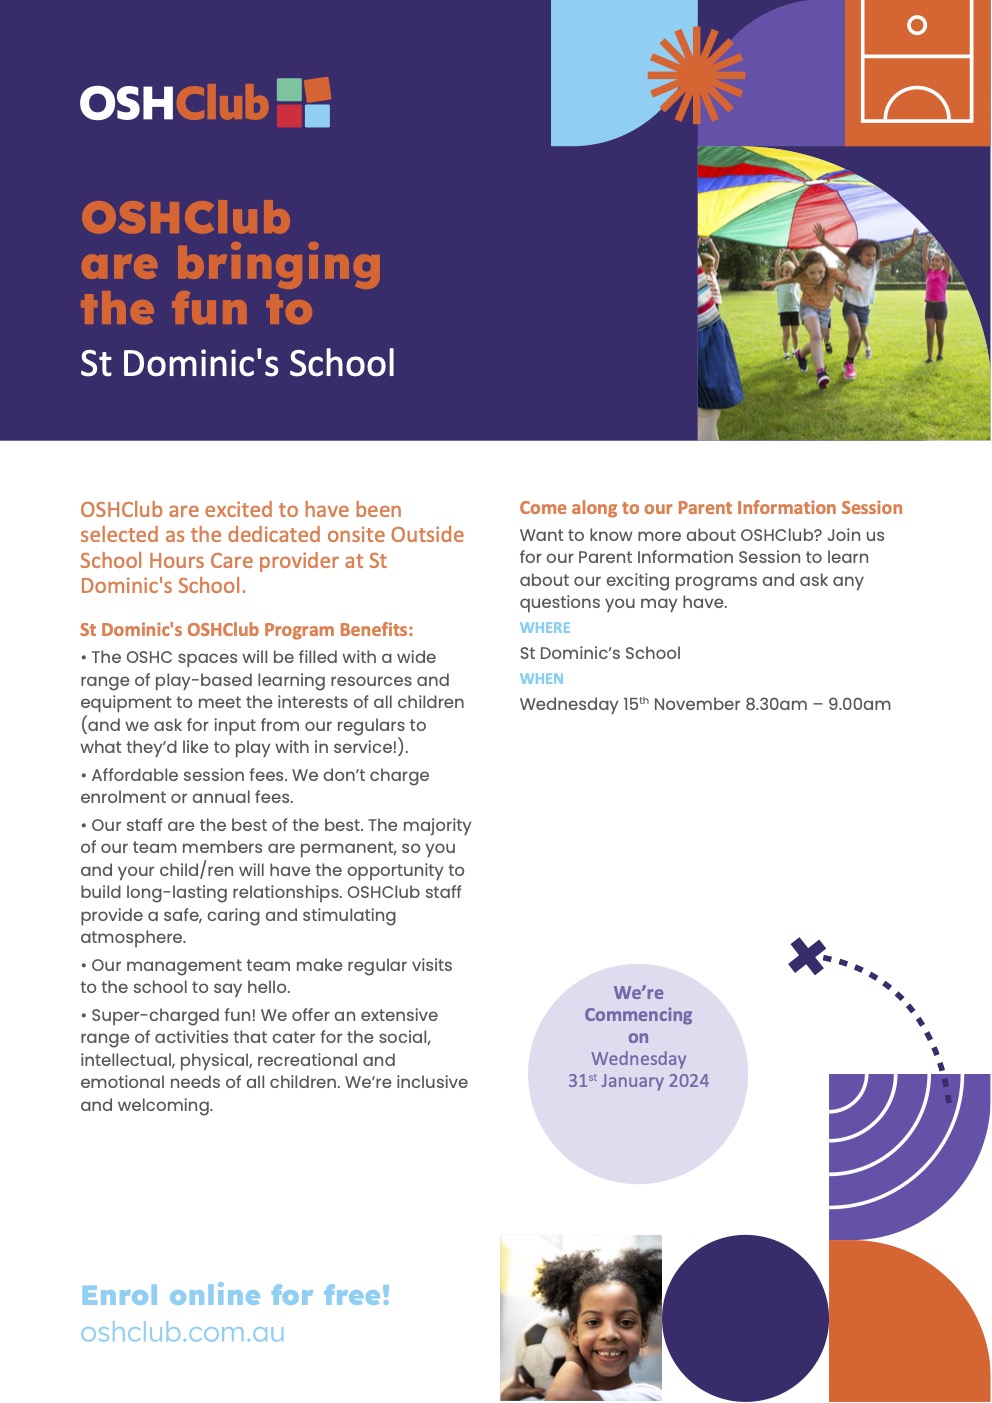 Onsite After School Hours Care Coming to St Dominic’s in 2024